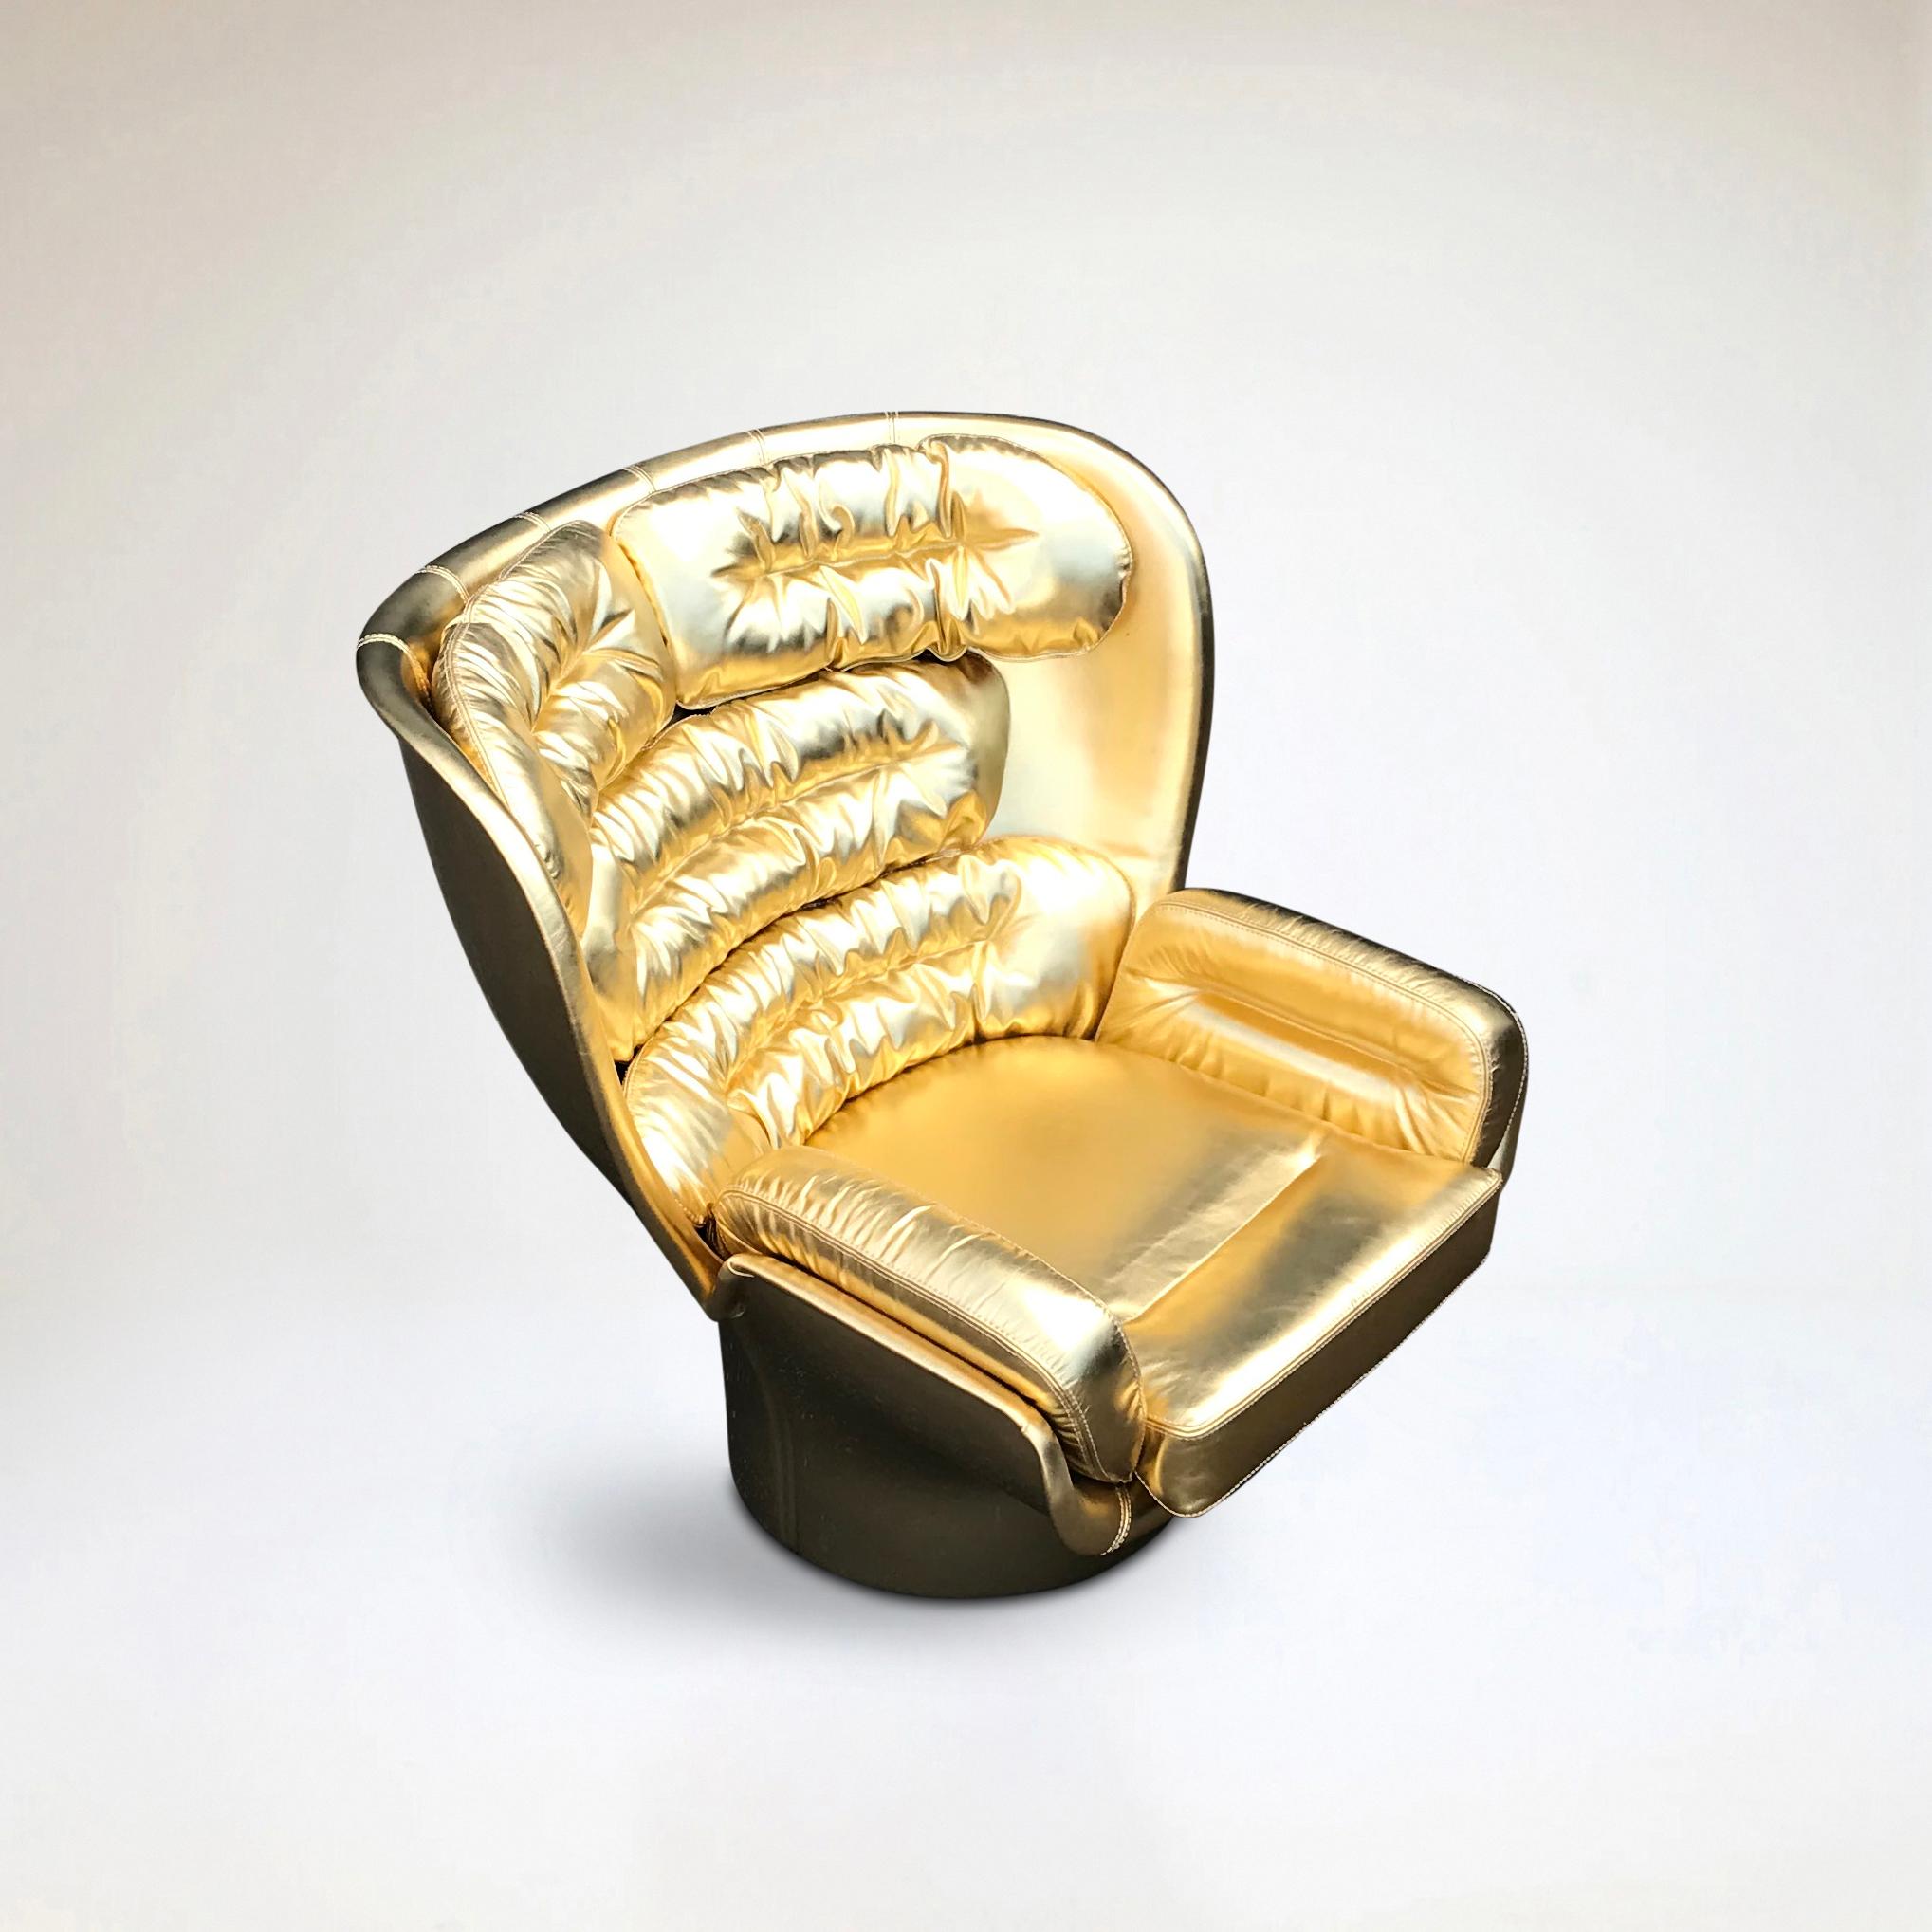 Golden Limited Edition Elda Chair by Joe Colombo for Longhi Italy no. 7/20 For Sale 4